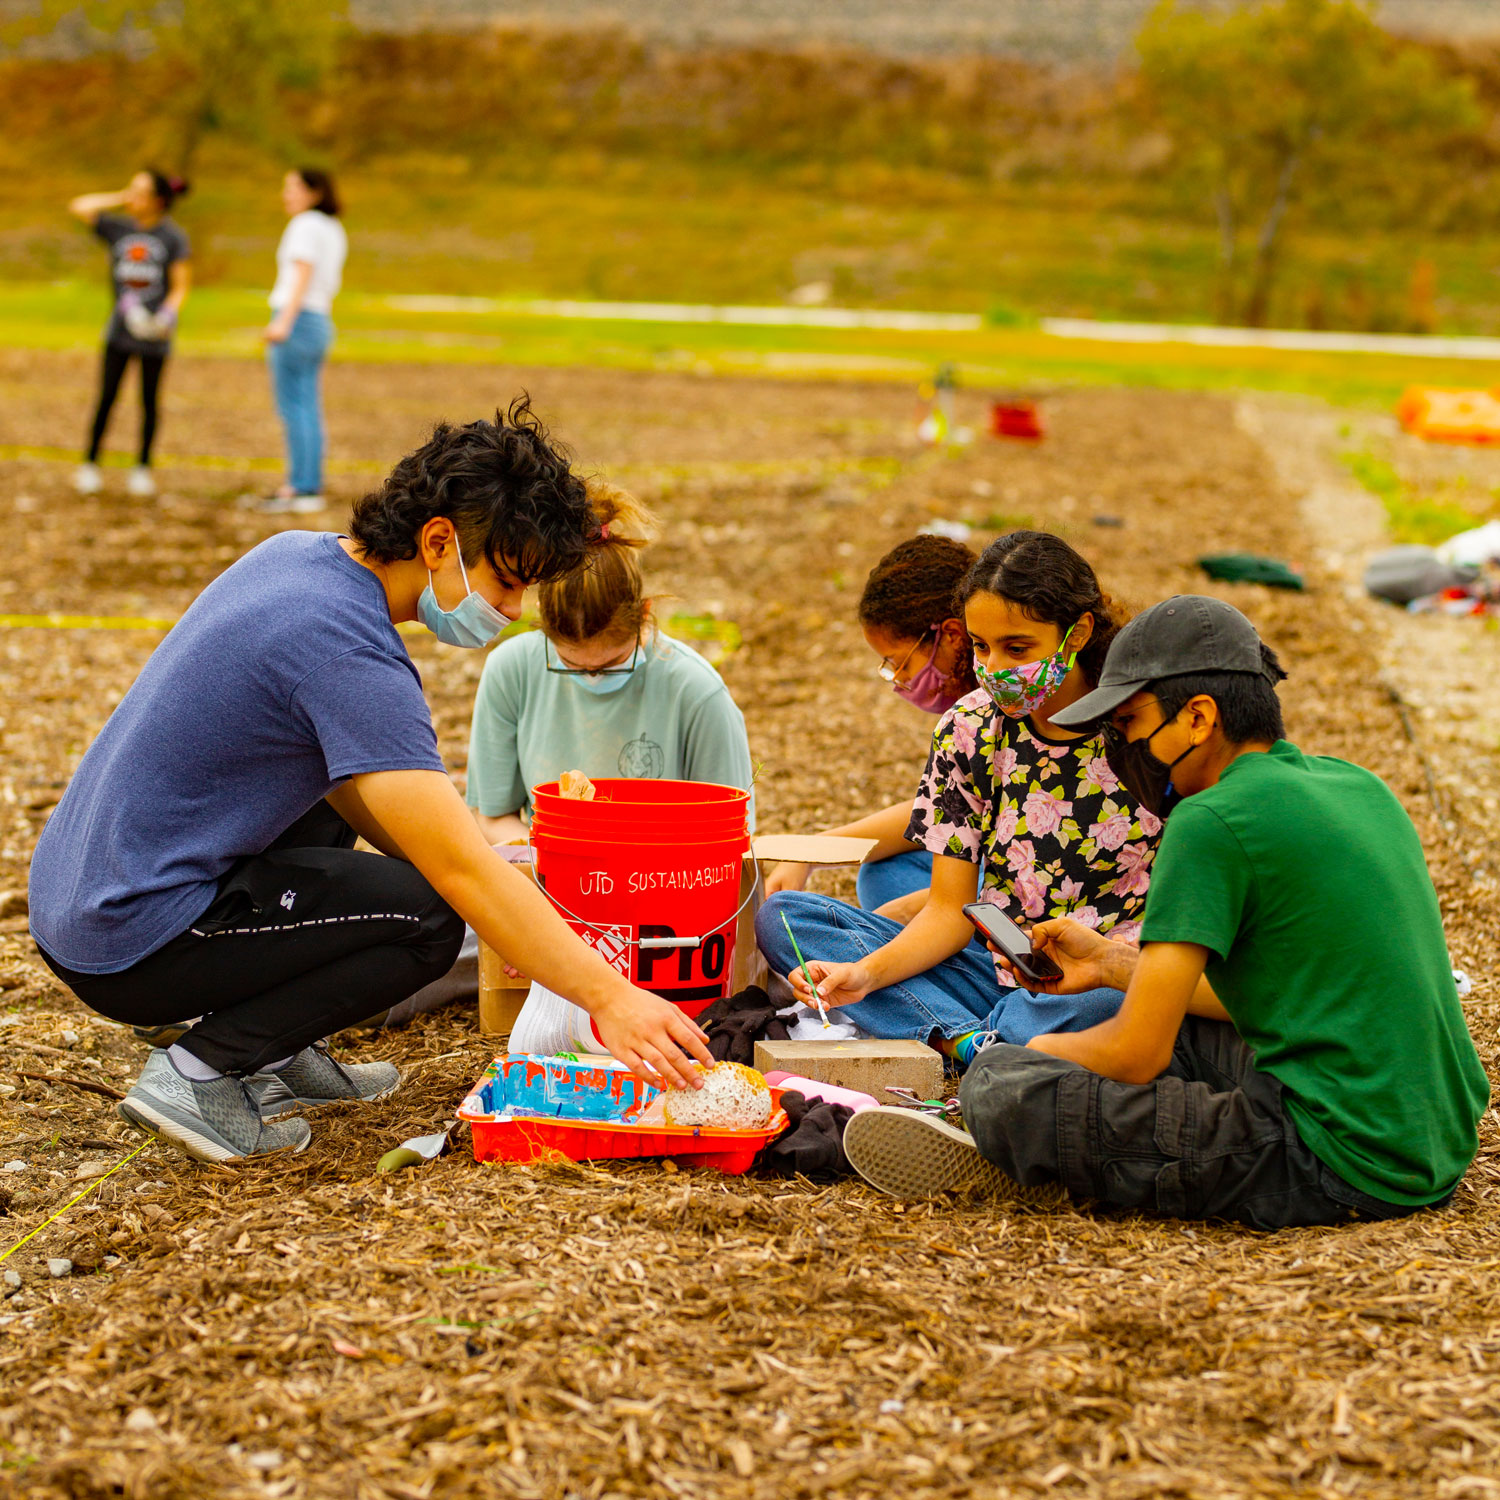 Students sitting in a circle around some gardening supplies.